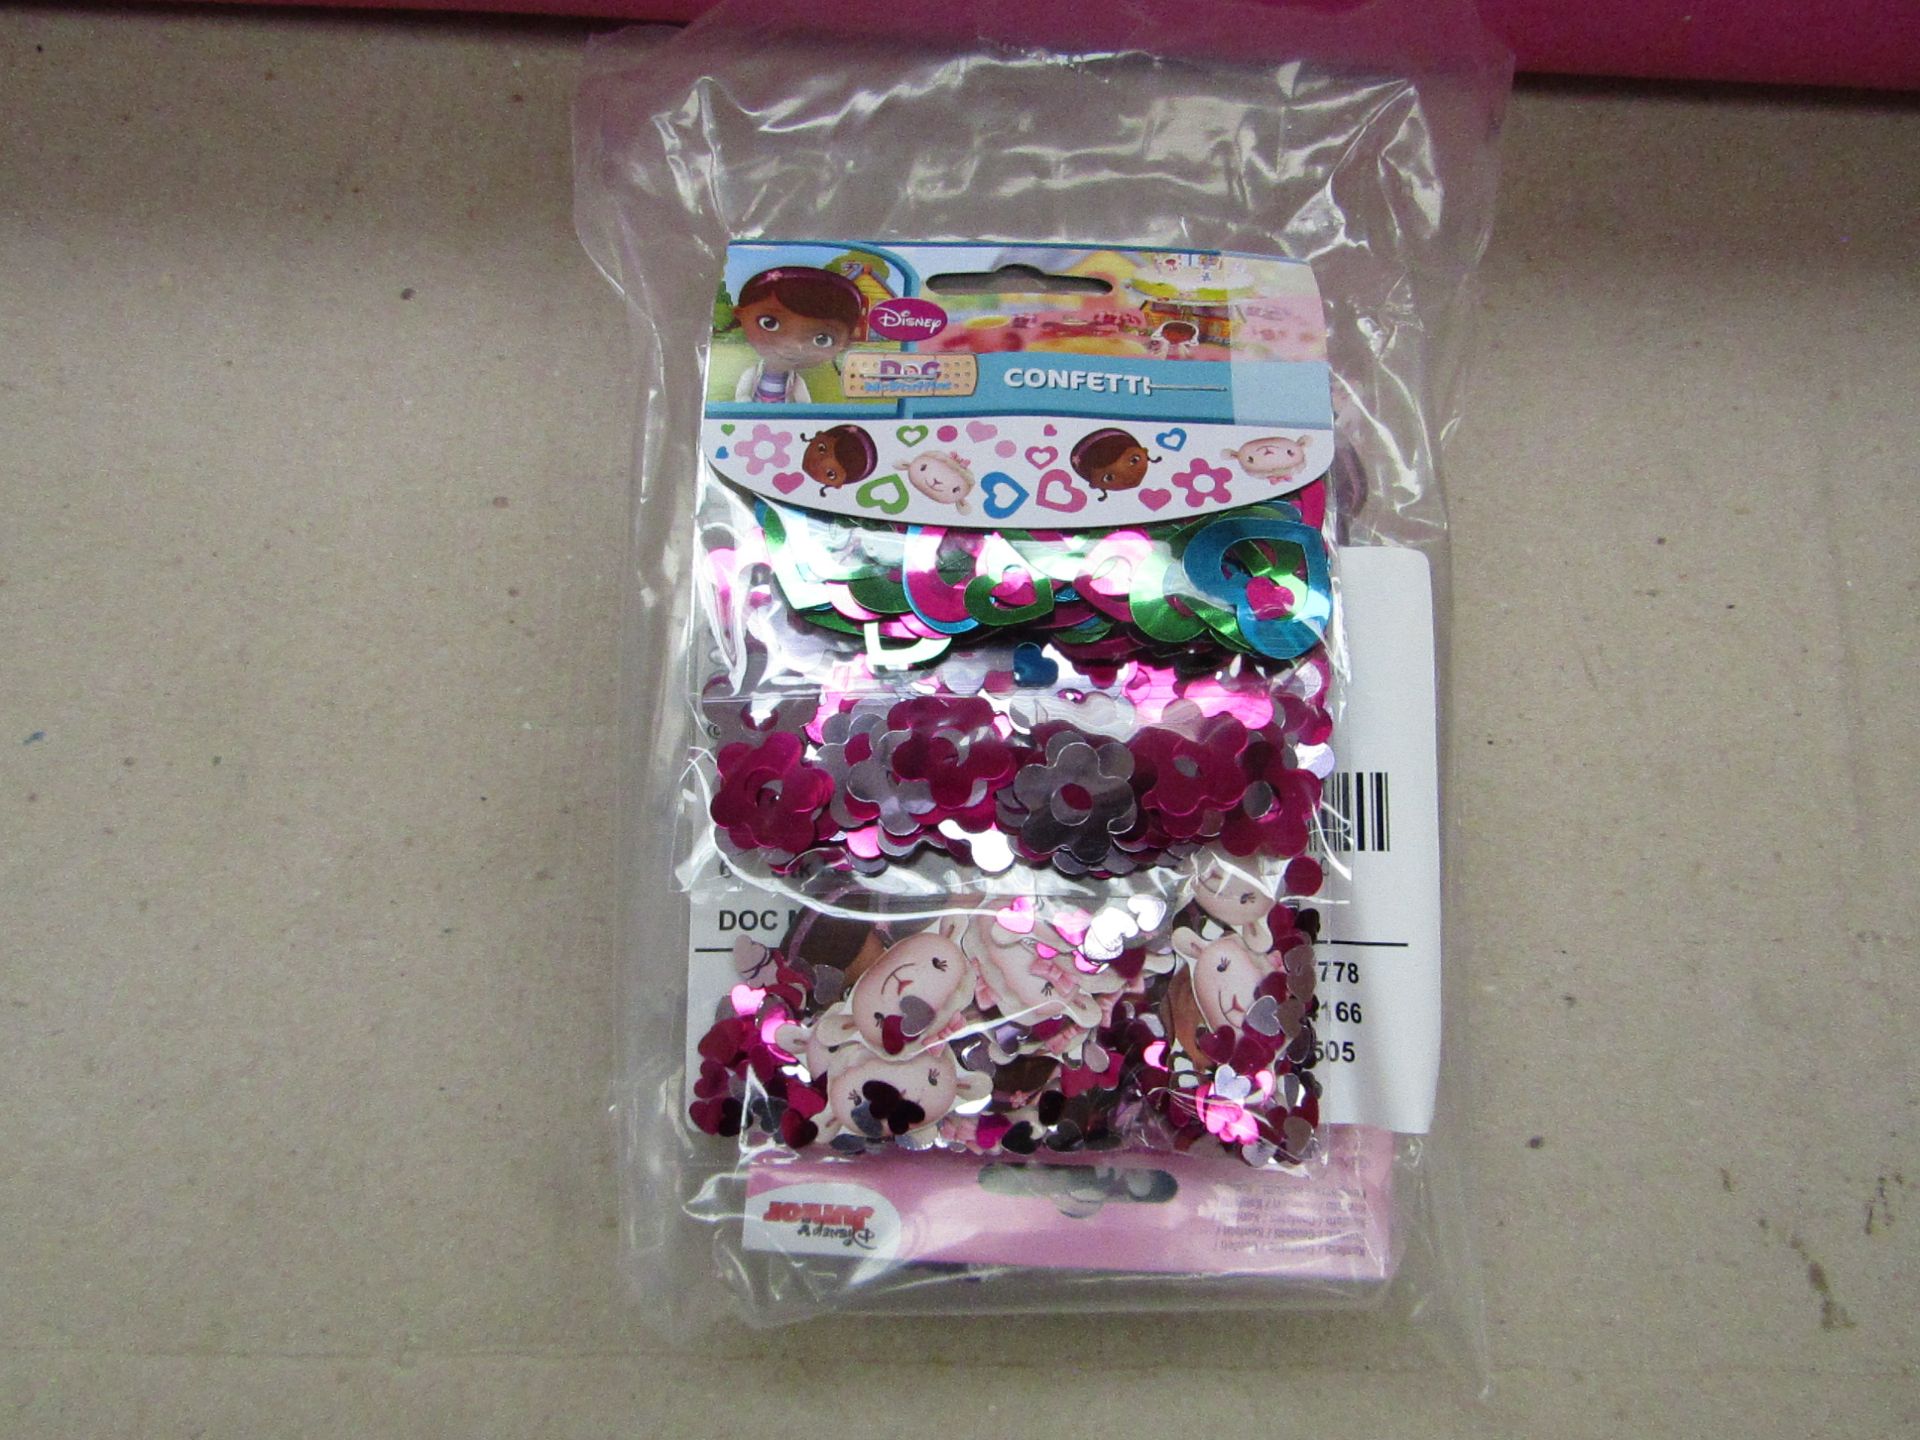 24x Disney - Doc McStuffins Confetti ( 4x Packs of 6 ) - New & Packaged.